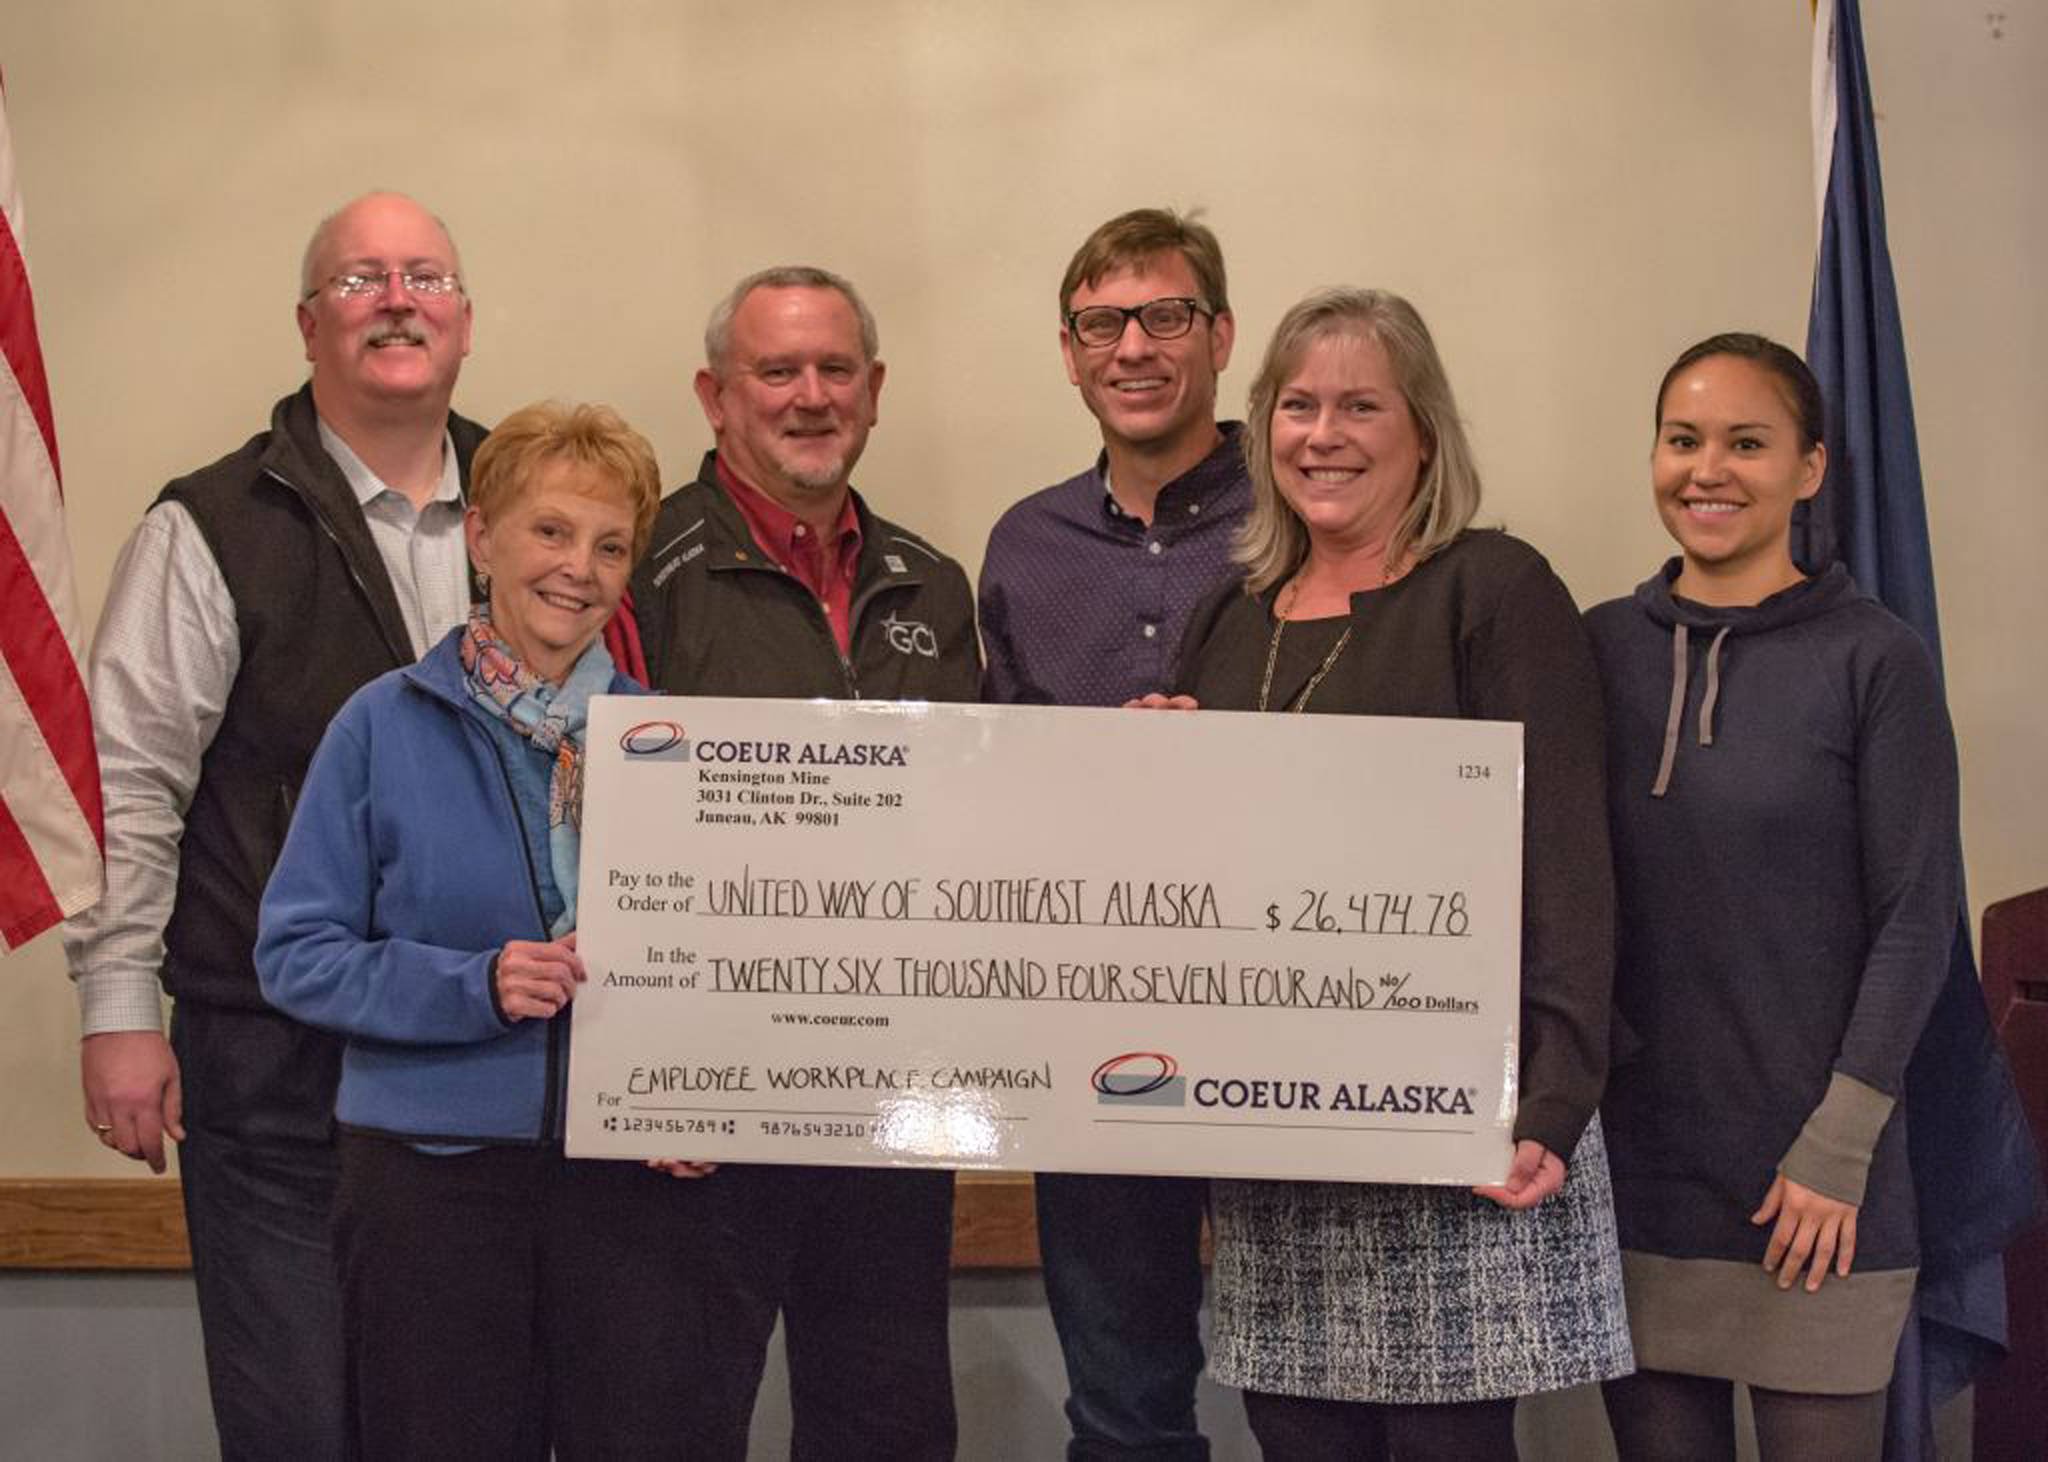 Mark Kiessling, General Manager of Coeur Alaska, Kensington Mine presents a check for $26,474.78 to Warren Russell, Chair of the United Way of Southeast Alaska Board. This amount represents the pledged amount for the 2017 annual campaign of $21,474.78 from 56 employees of Coeur Alaska Kensington Mine and a matching corporate gift of $5,000 from Coeur Alaska, Kensington Mine. In making the presentation at the Nov. 15 Juneau Chamber Luncheon Kiessling noted that, “small contributions in large volumes from a number of people can make a huge difference in our community.”